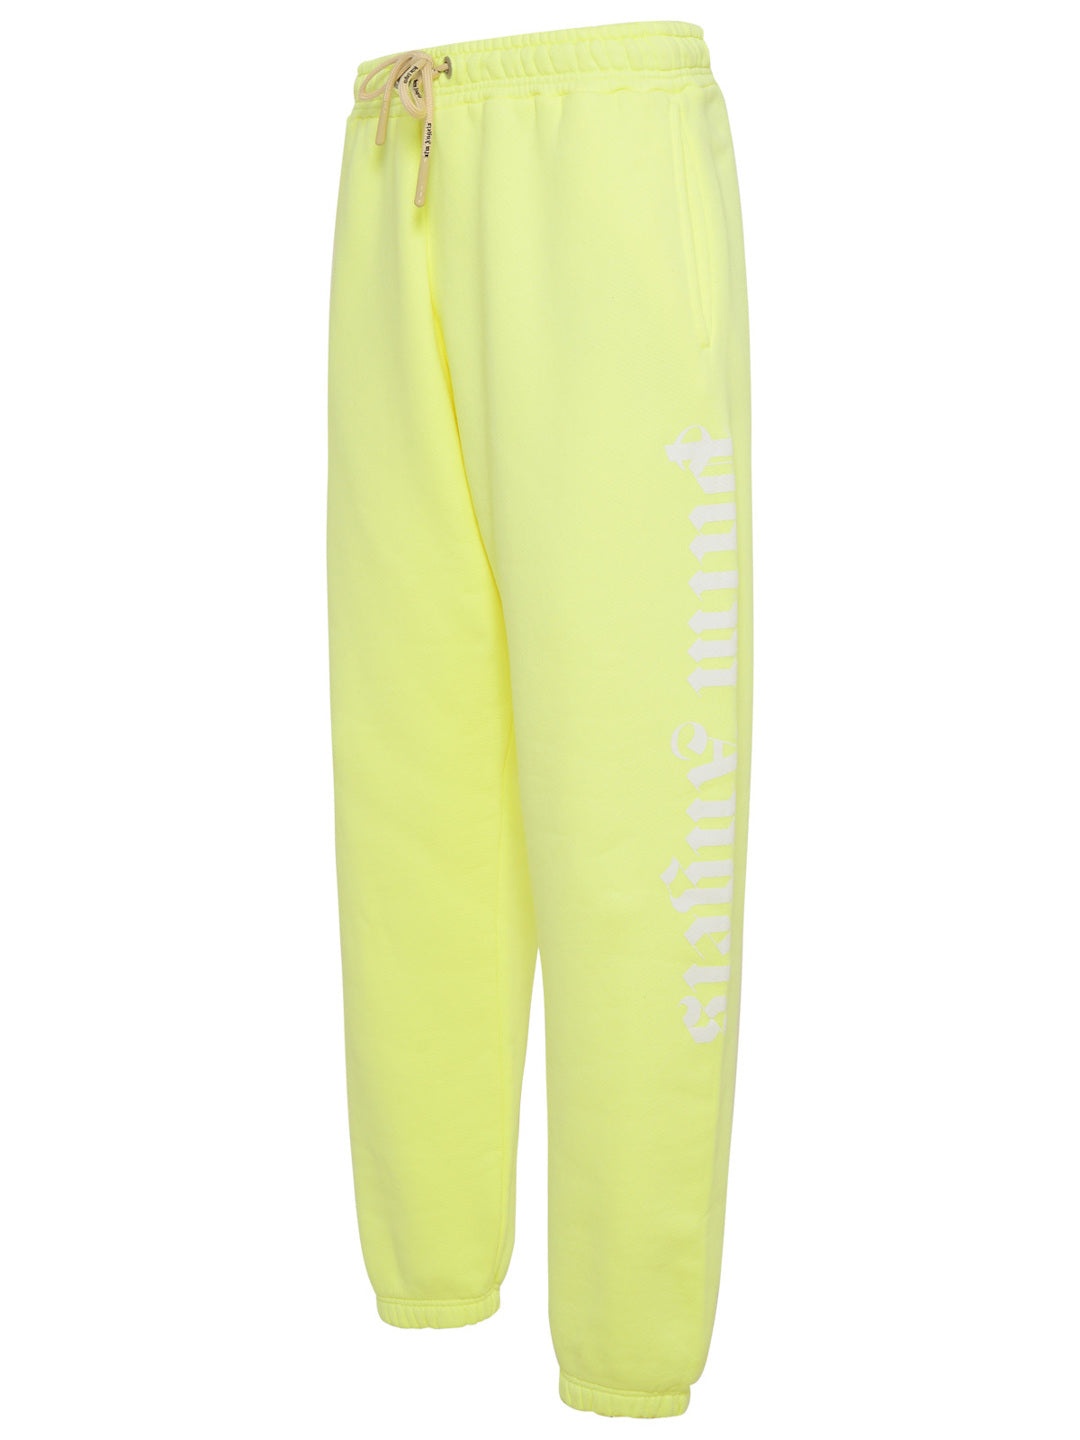 PALM ANGELS Neon Yellow Cotton Track Suit Pants - 2